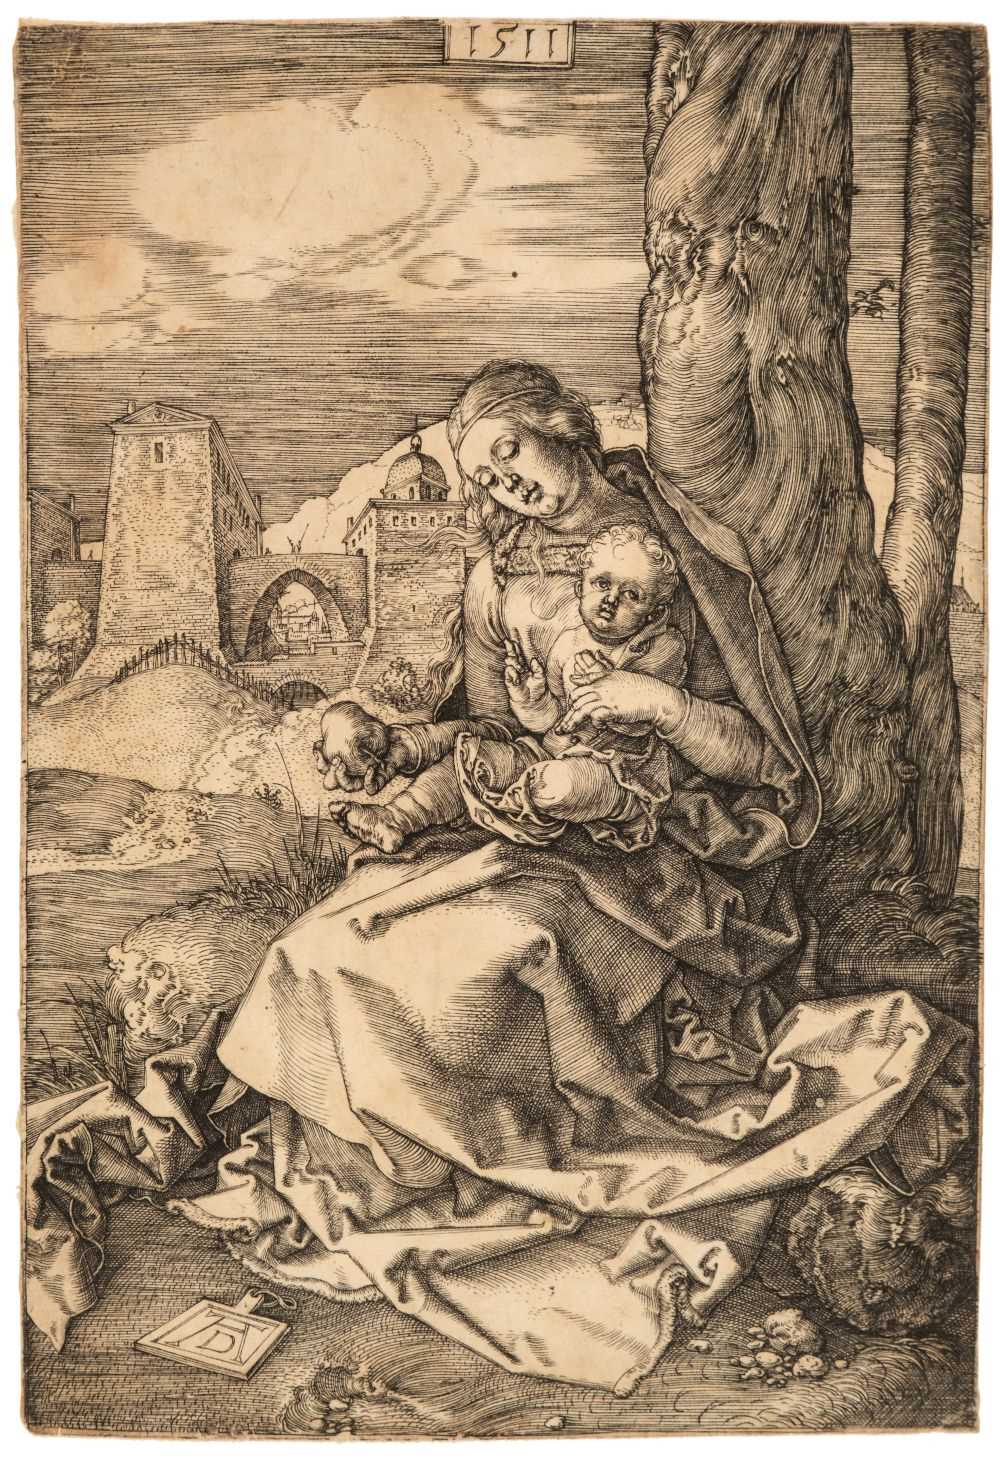 Lot 197 - Dürer (Albrecht, 1471-1528), The Virgin and Child with the Pear, 1511, engraving, Meder b